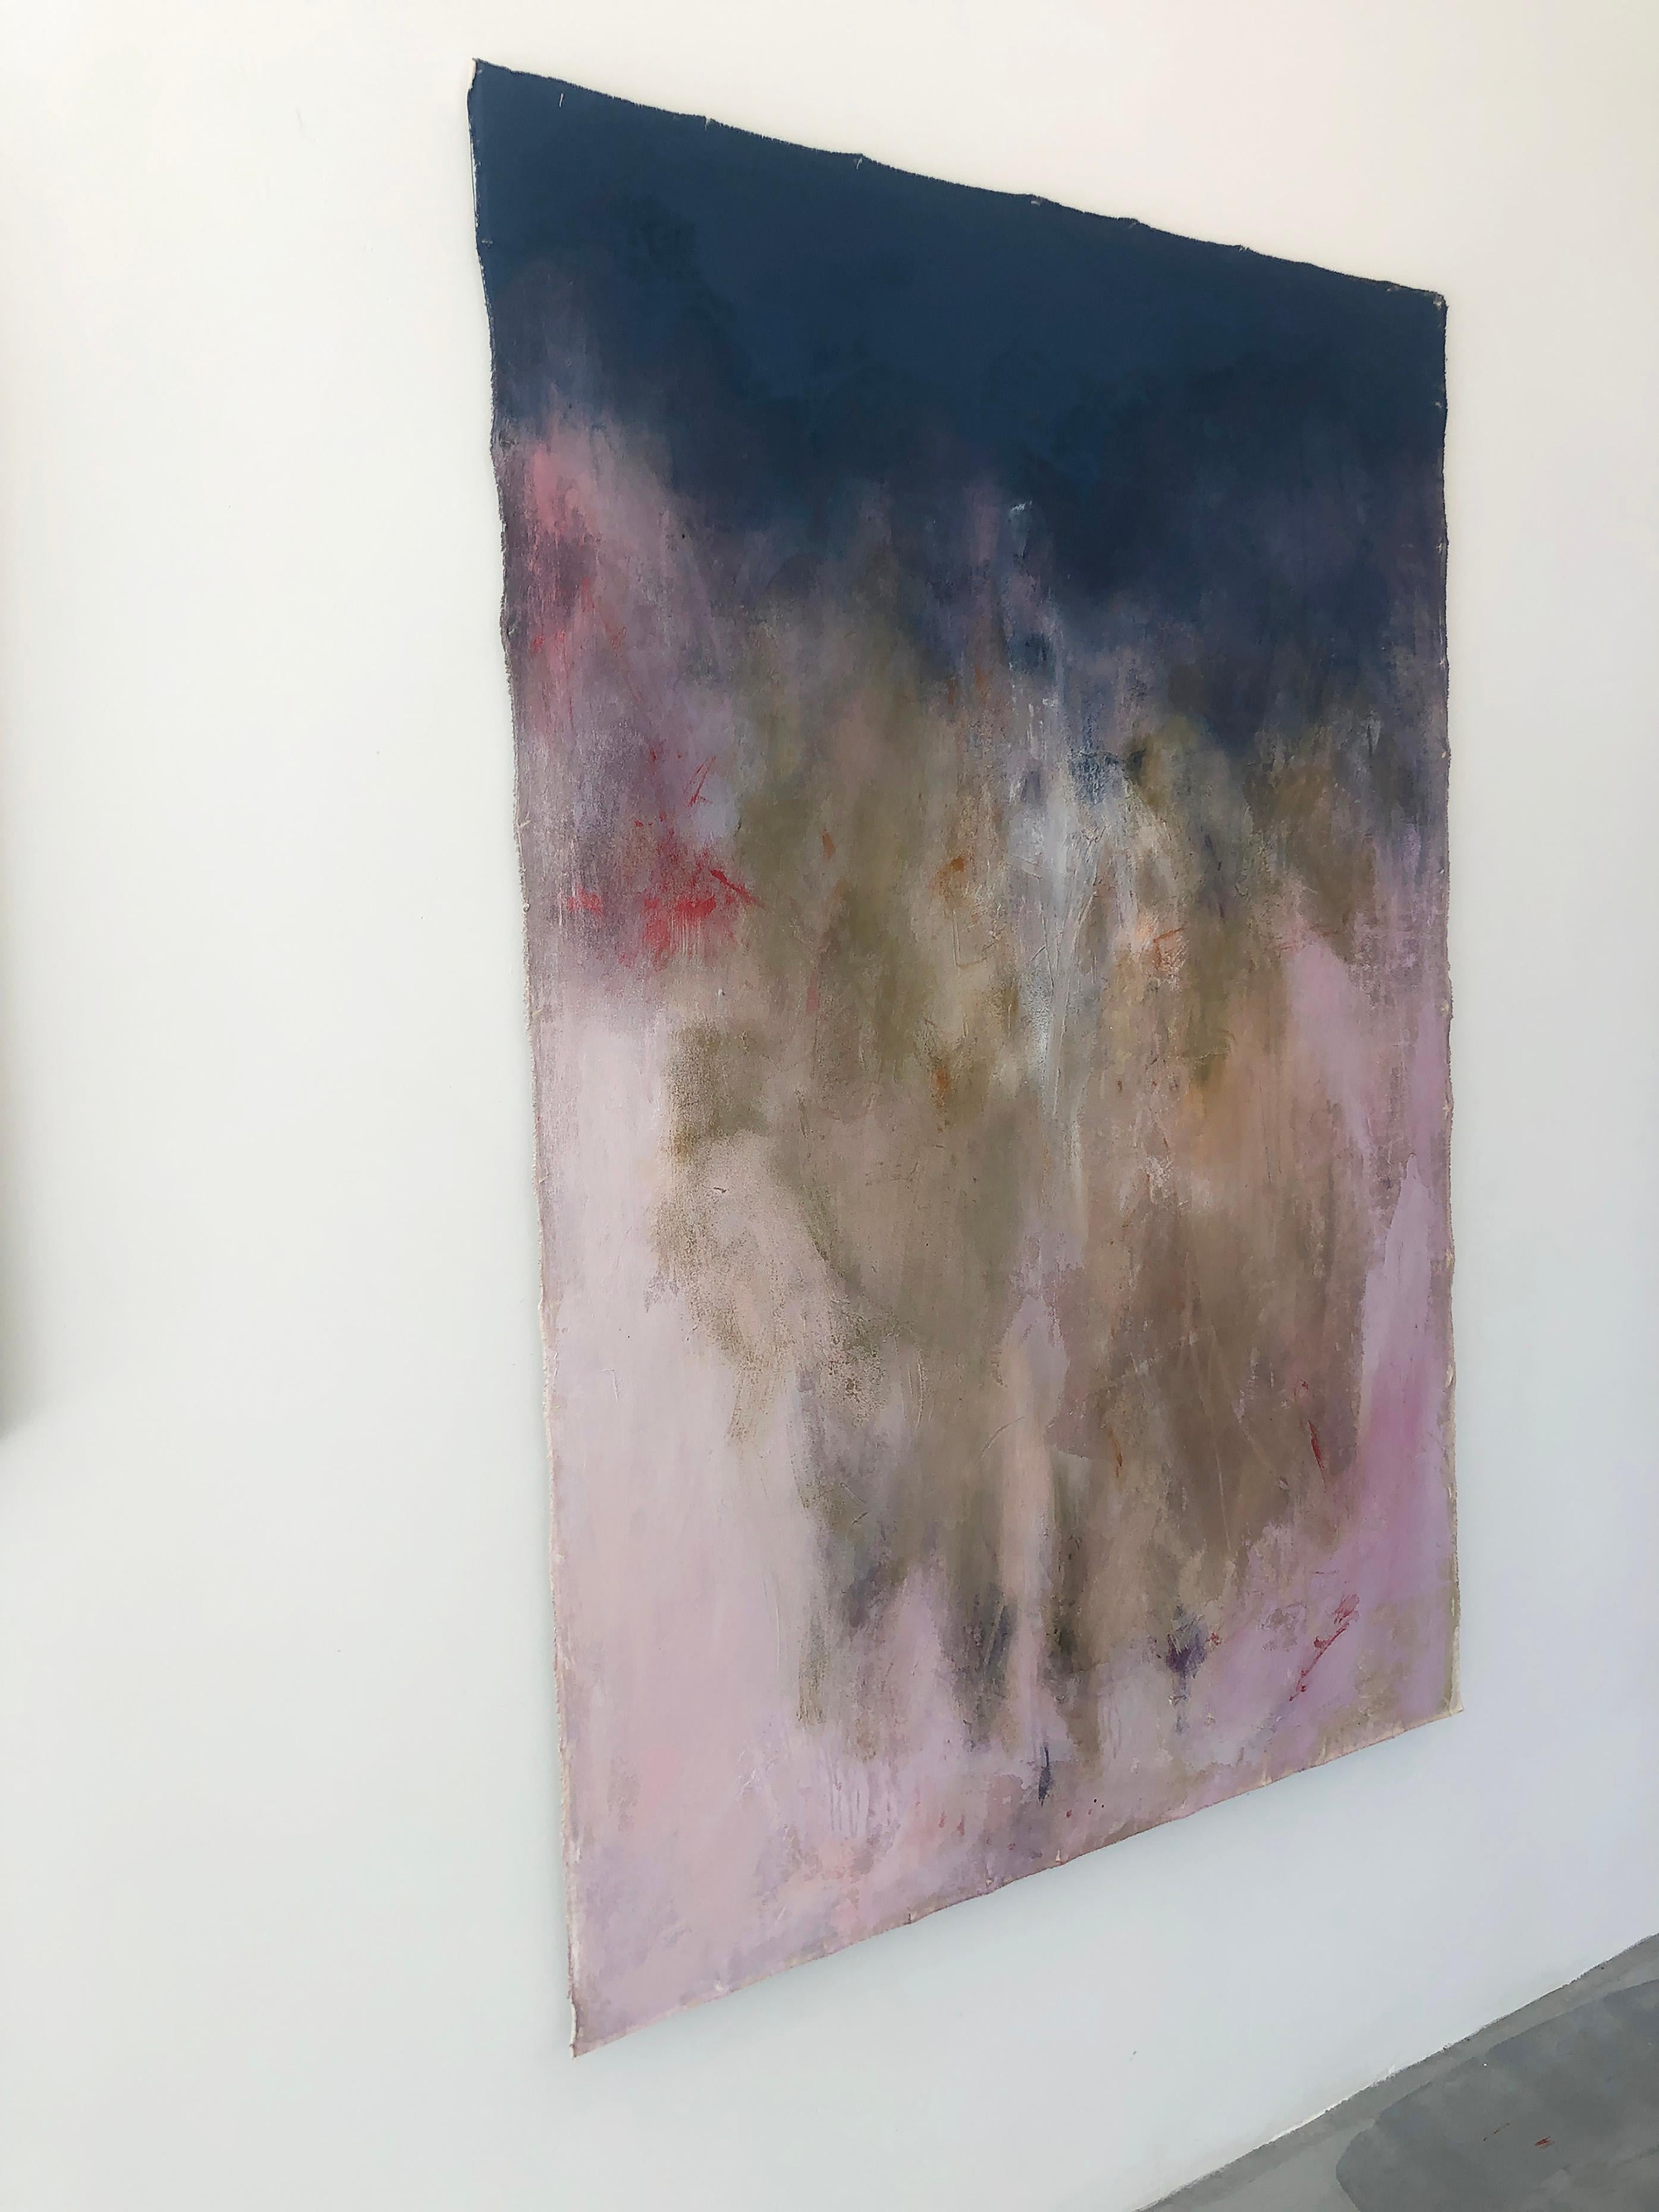 Between Heaven and Earth: Untitled #8 Acrylic on canvas with graphite and pastel - Gray Abstract Painting by Stephanie Visser 